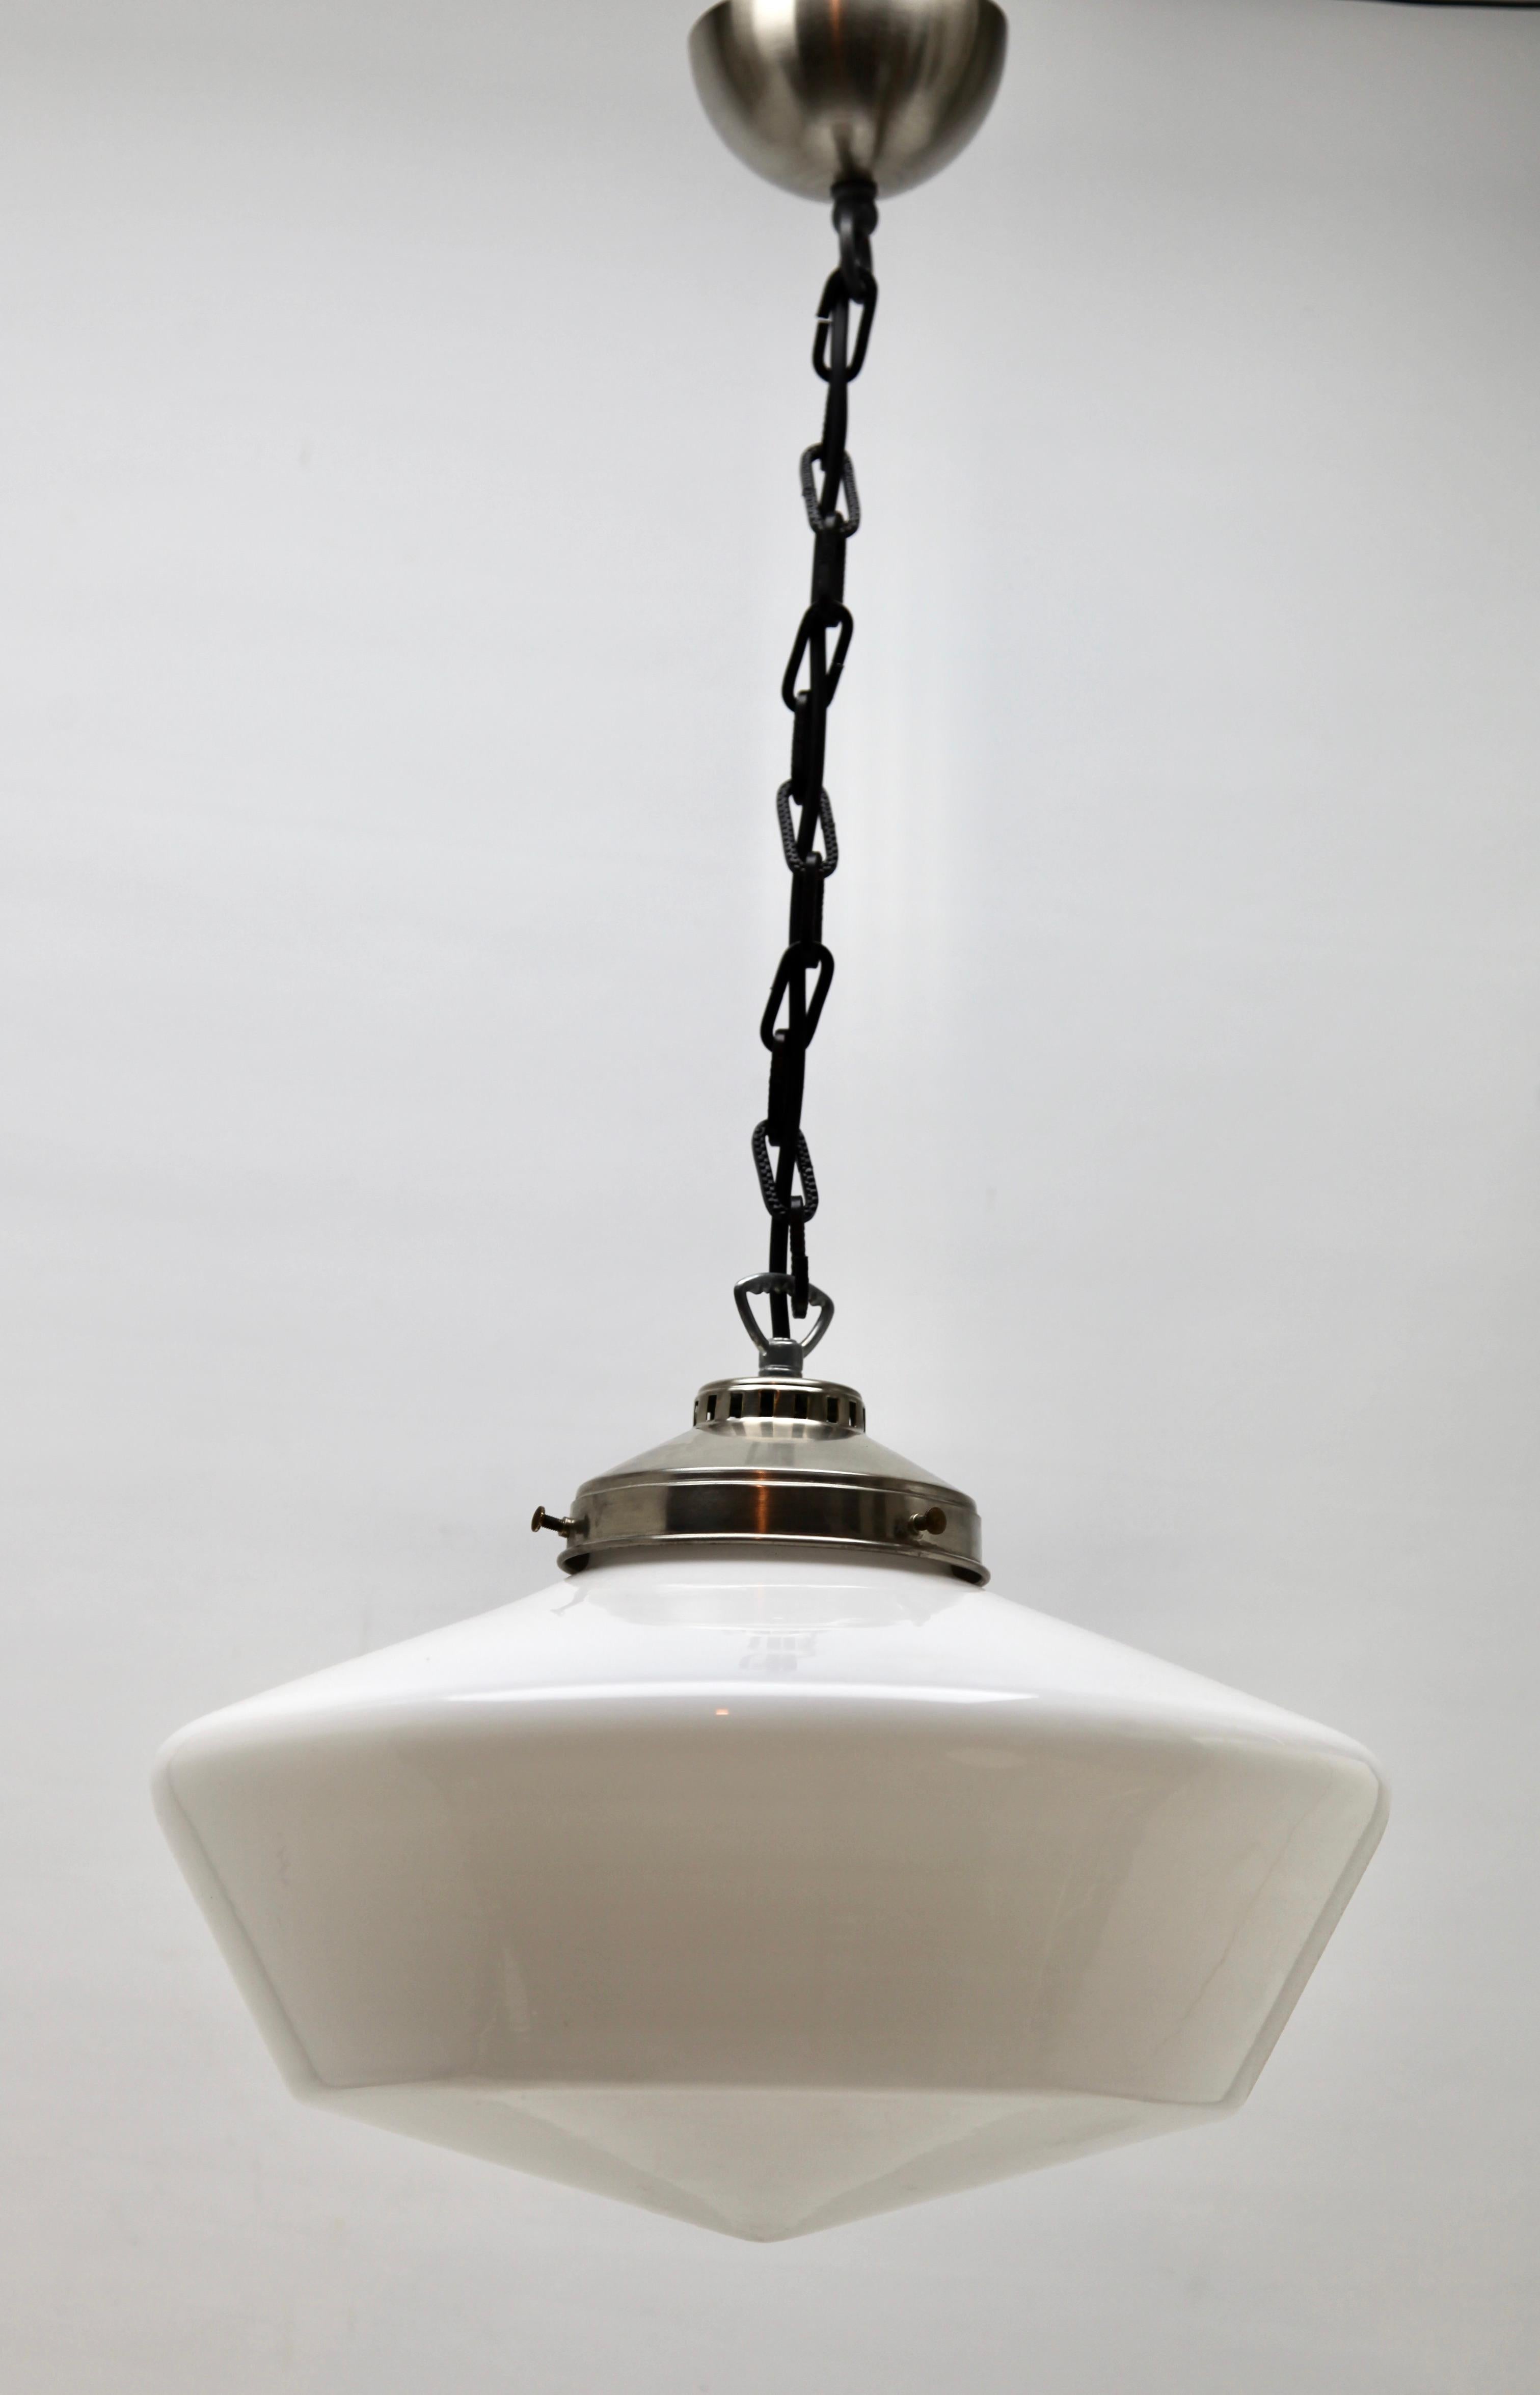 From the range by the Phillips Company, this center-light on a central chain. The lamp has a fitting on a chromed plate and holds a stepped globular shade of opaline glass.

2 Availebel

In good condition and in full working order with standard new